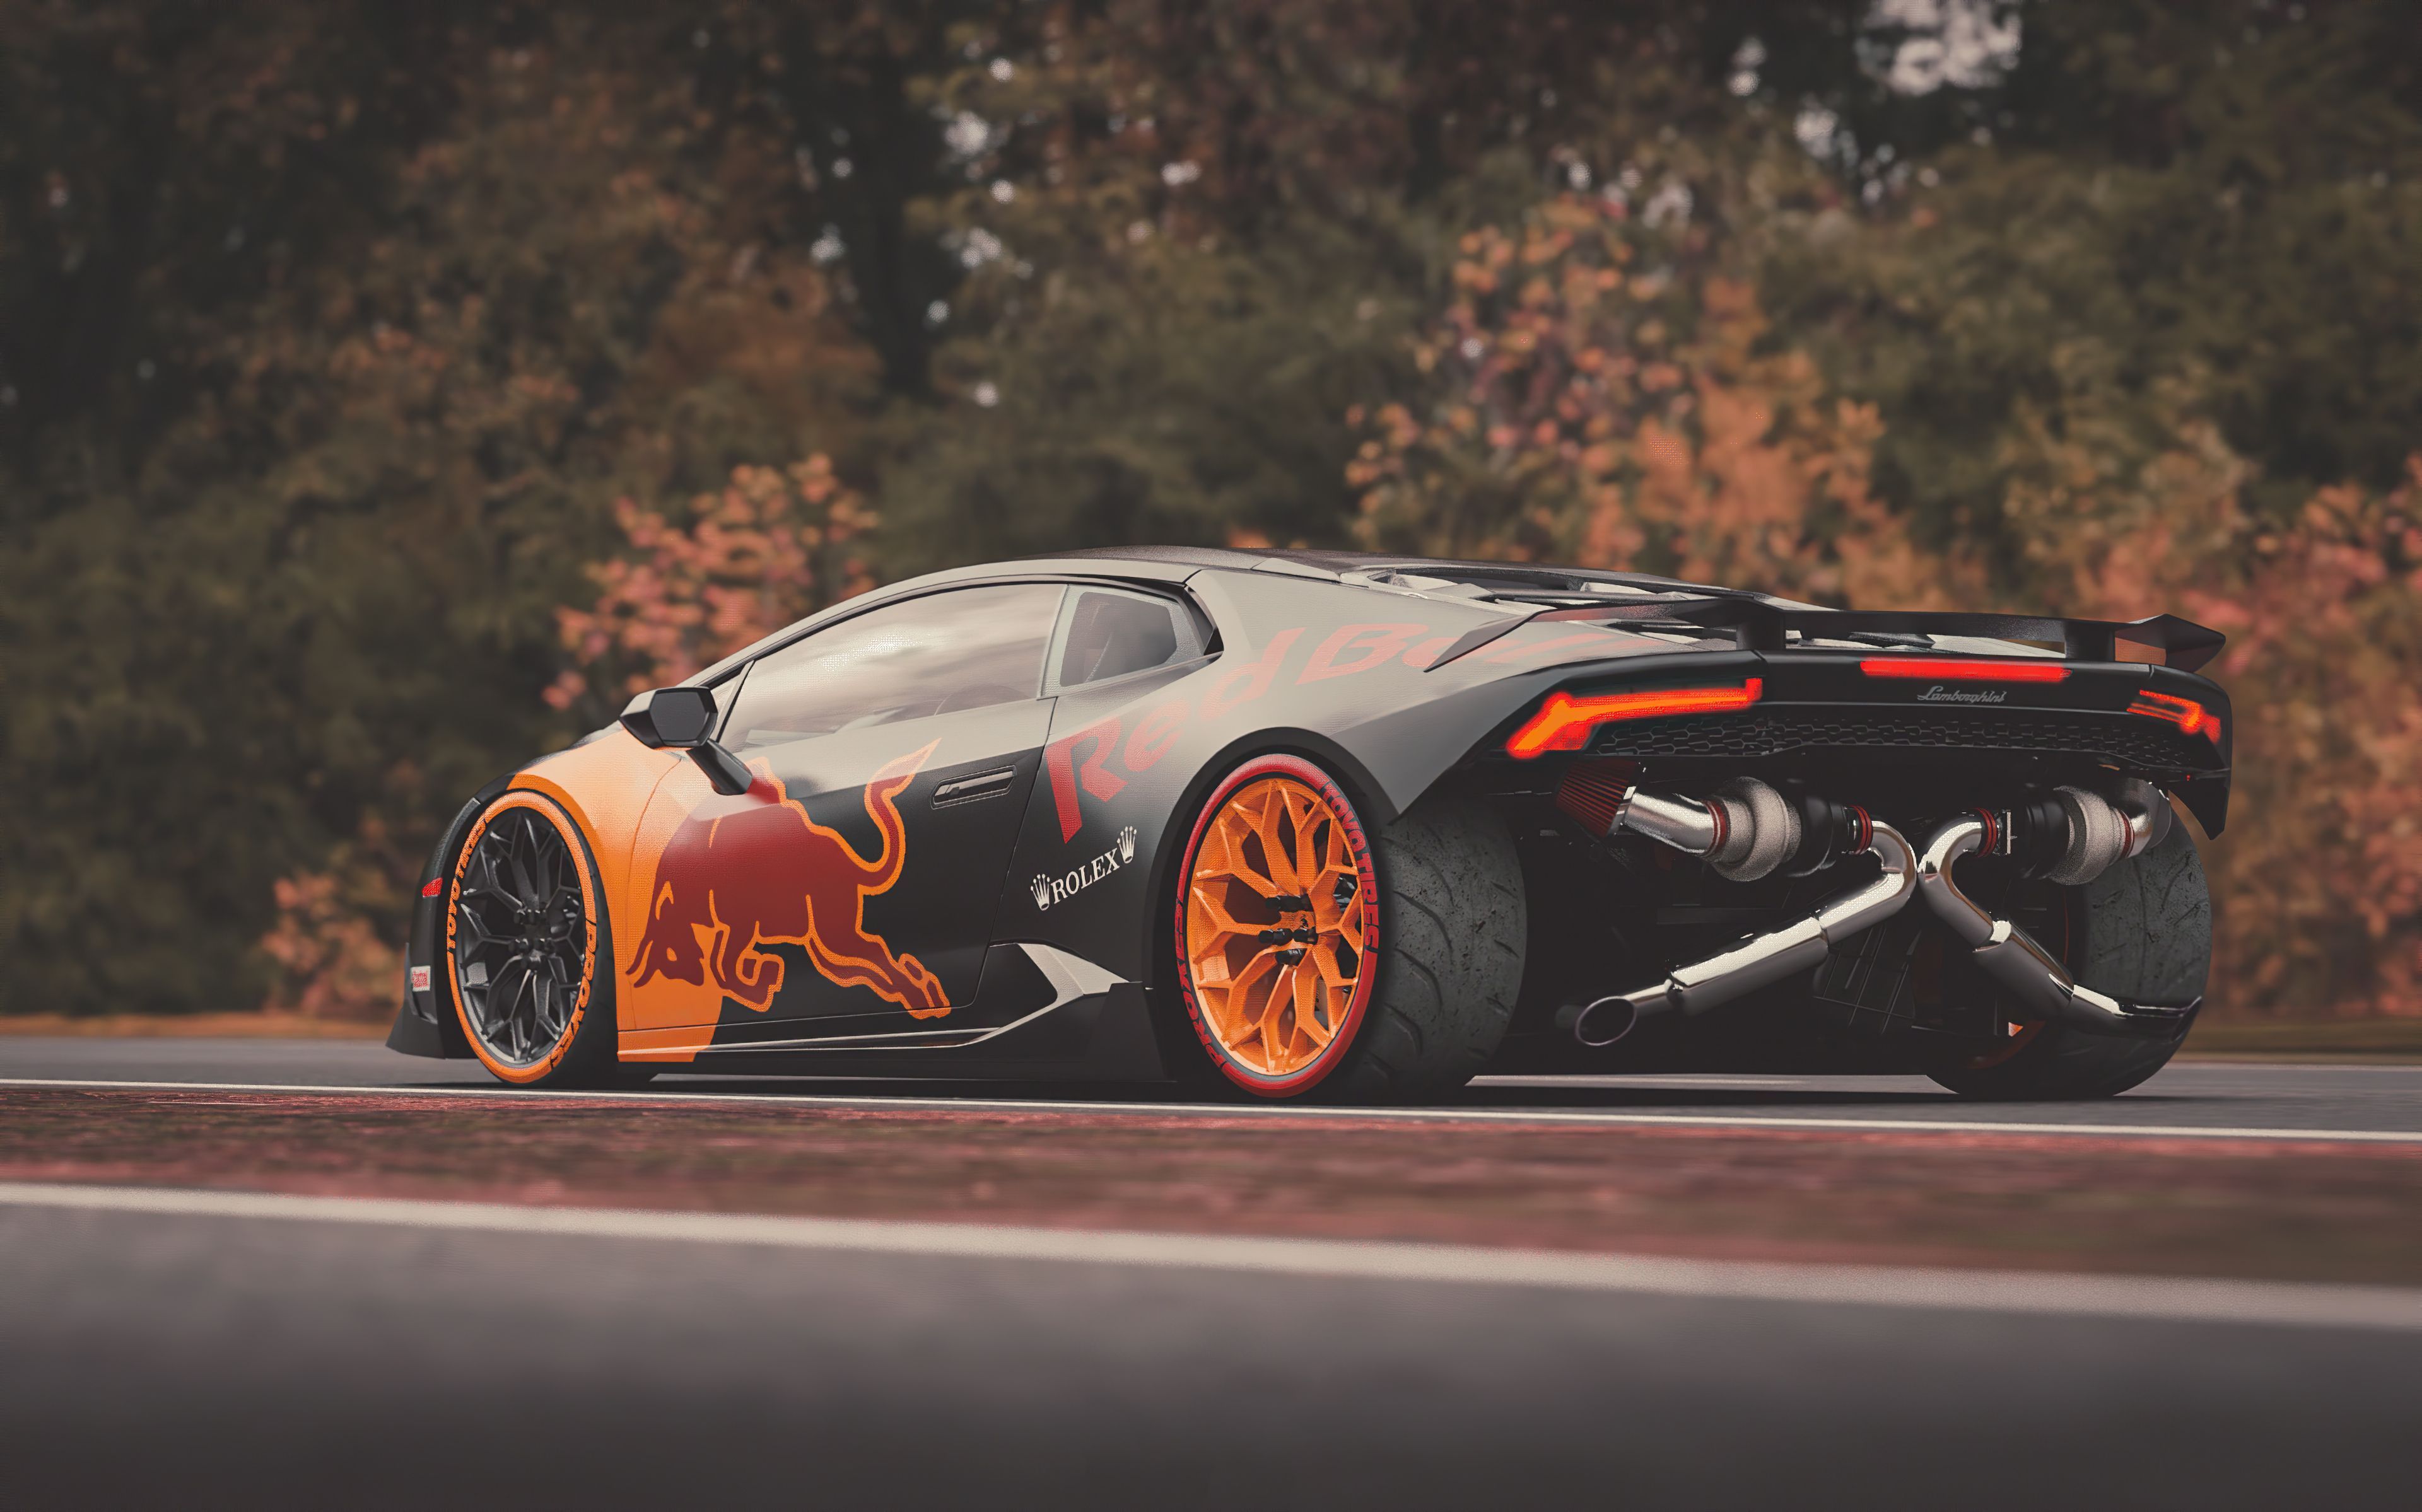 Syvecs Ltd  A cracking shot of Marc Pterodactyltactics 2017 Twin Turbo  Lamborghini Huracán 5802 This car is a work of art from the custom  widebody Super Trofeo bodykit to the insane